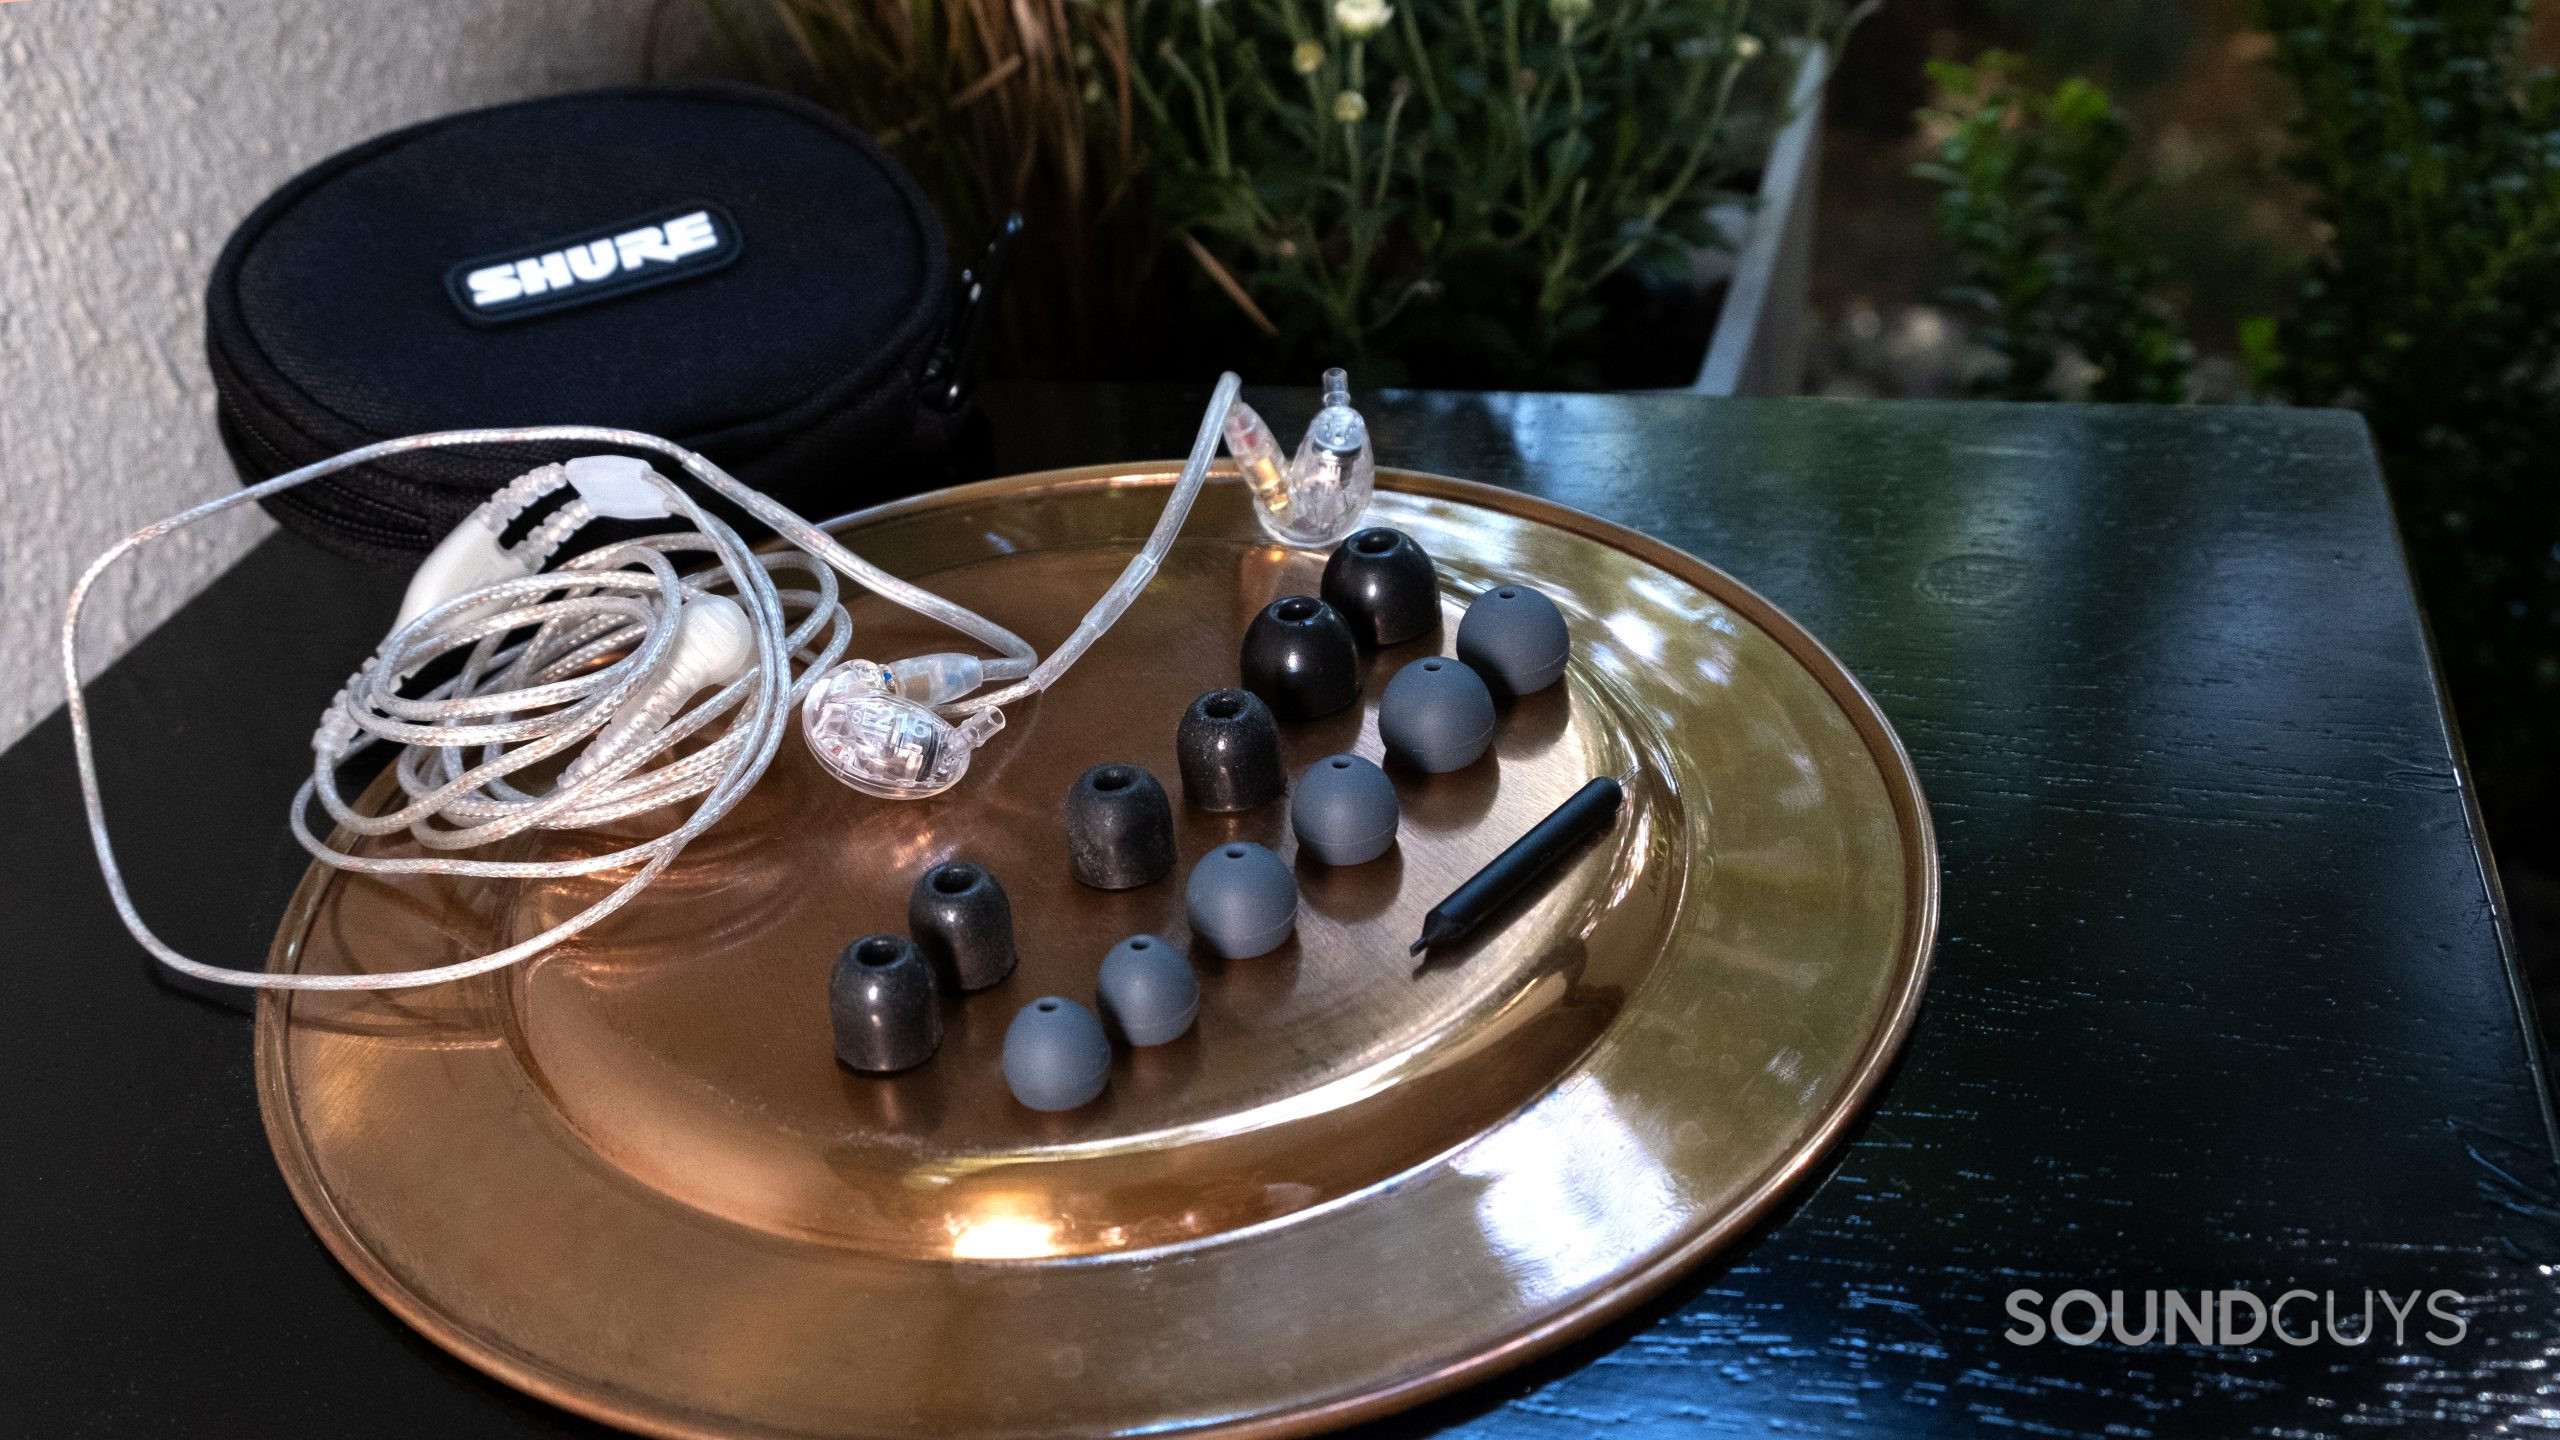 On a brass colored surface the full set of ear tips and the Shure SE215 sit outside on a black table with plants in the background